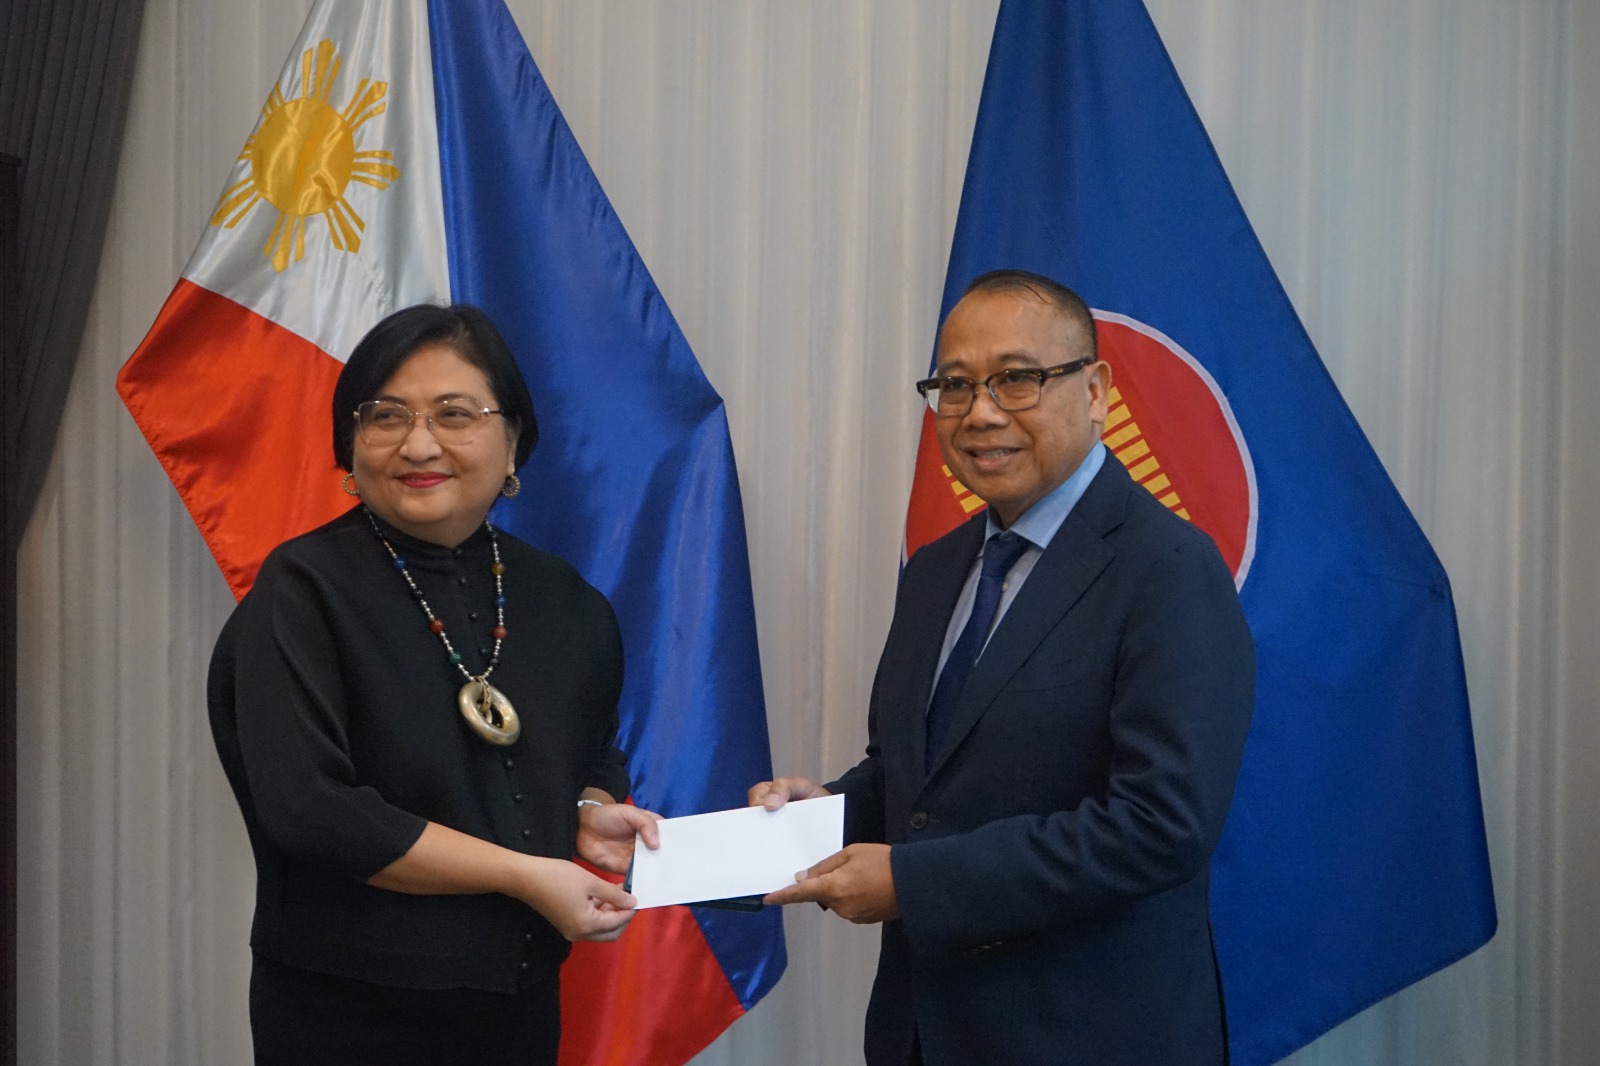 The Philippines commemorates 56th ASEAN Day by donating funds for more peace-building efforts in ASEAN